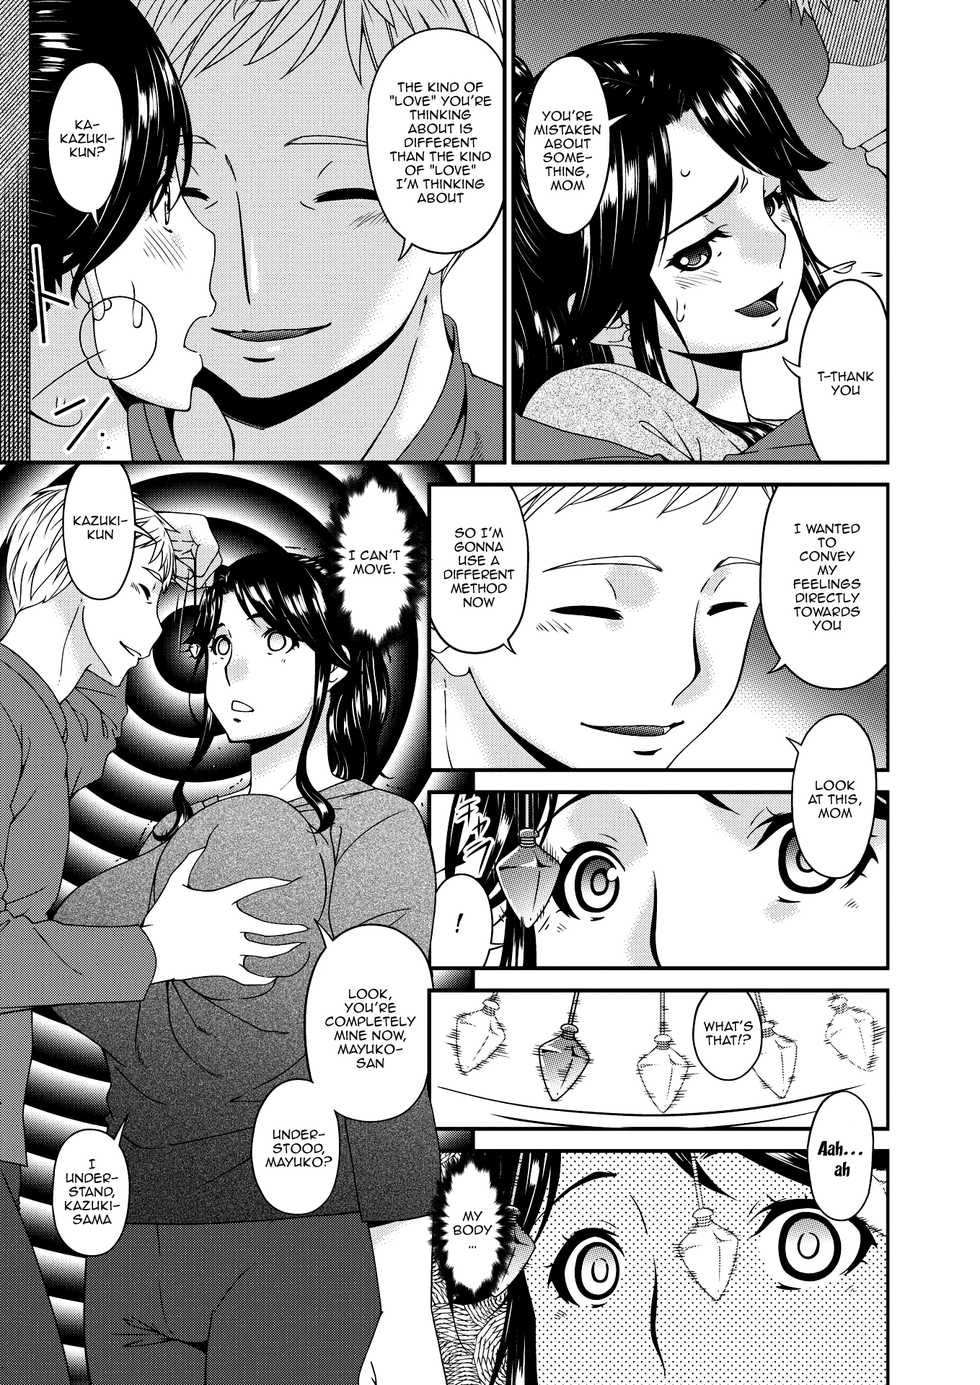 [Bai Asuka] Gibo, Omou Toki... | When I Started Thinking About My Mother-In-Law... (COMIC HOTMILK 2020-04) [English] {Doujins.com} [Digital] - Page 9